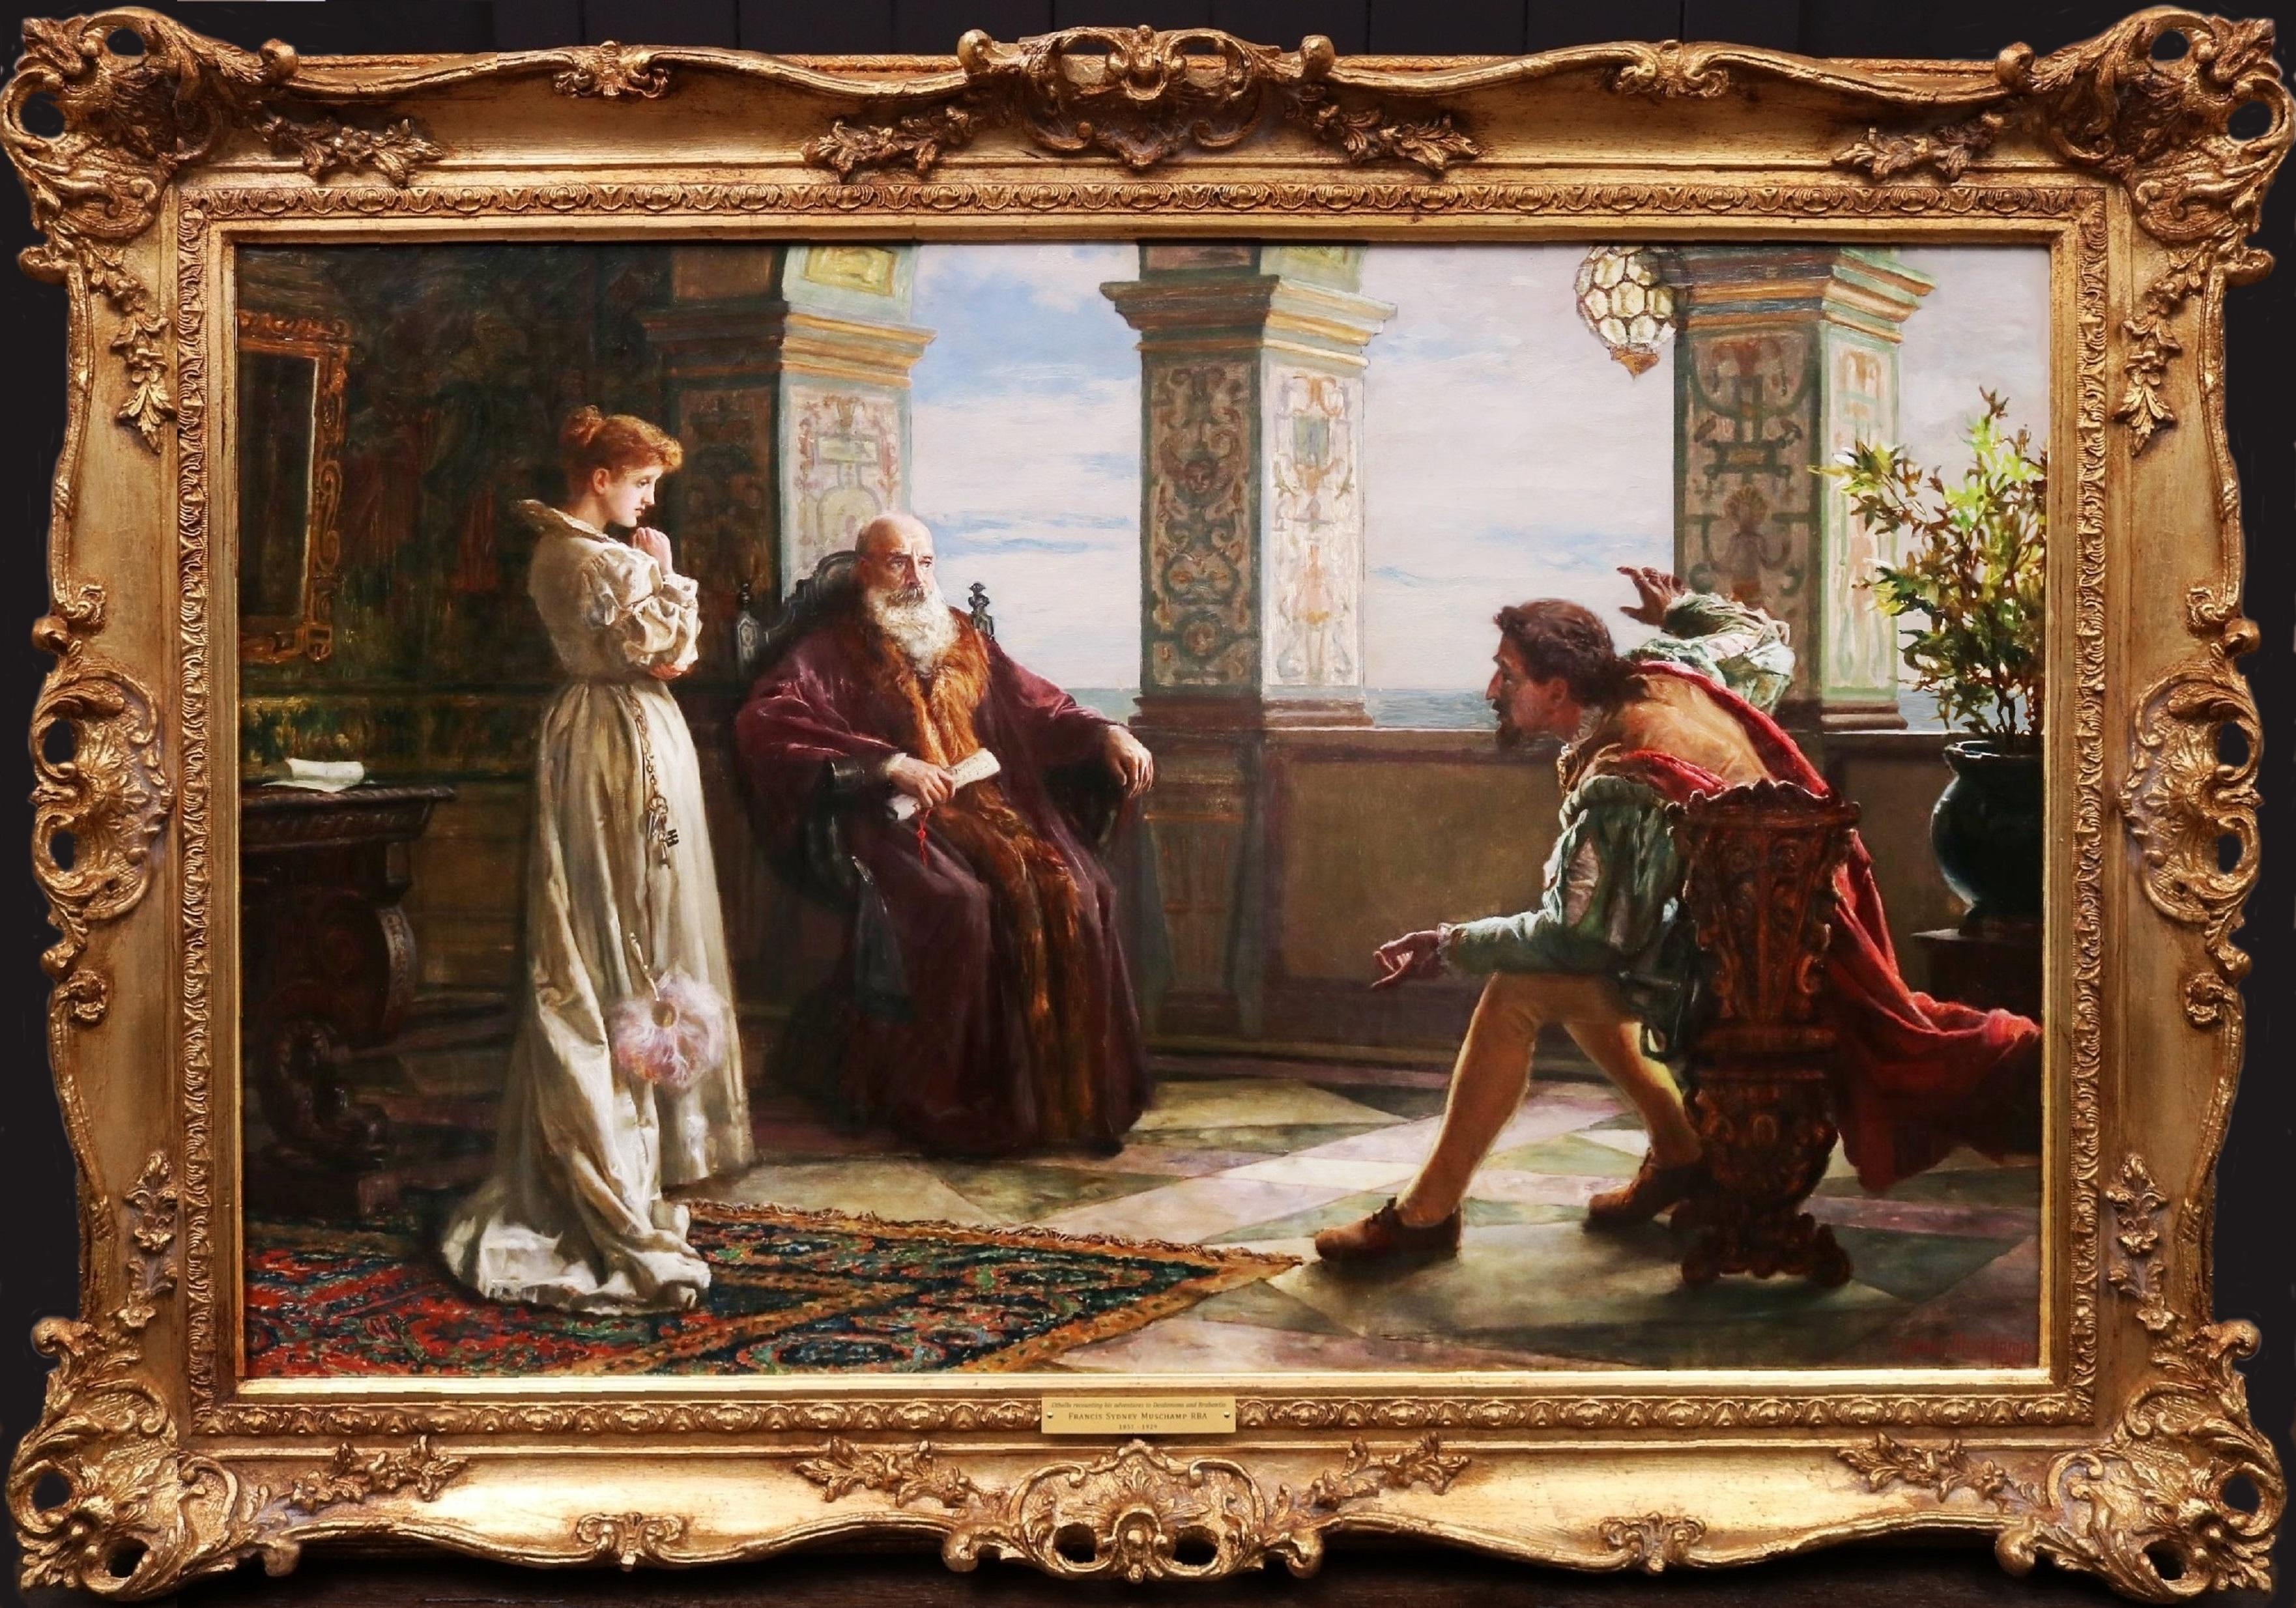 Francis Sydney Muschamp Portrait Painting - Othello recounting his Adventures to Desdemona - Large 19th Century Oil Painting